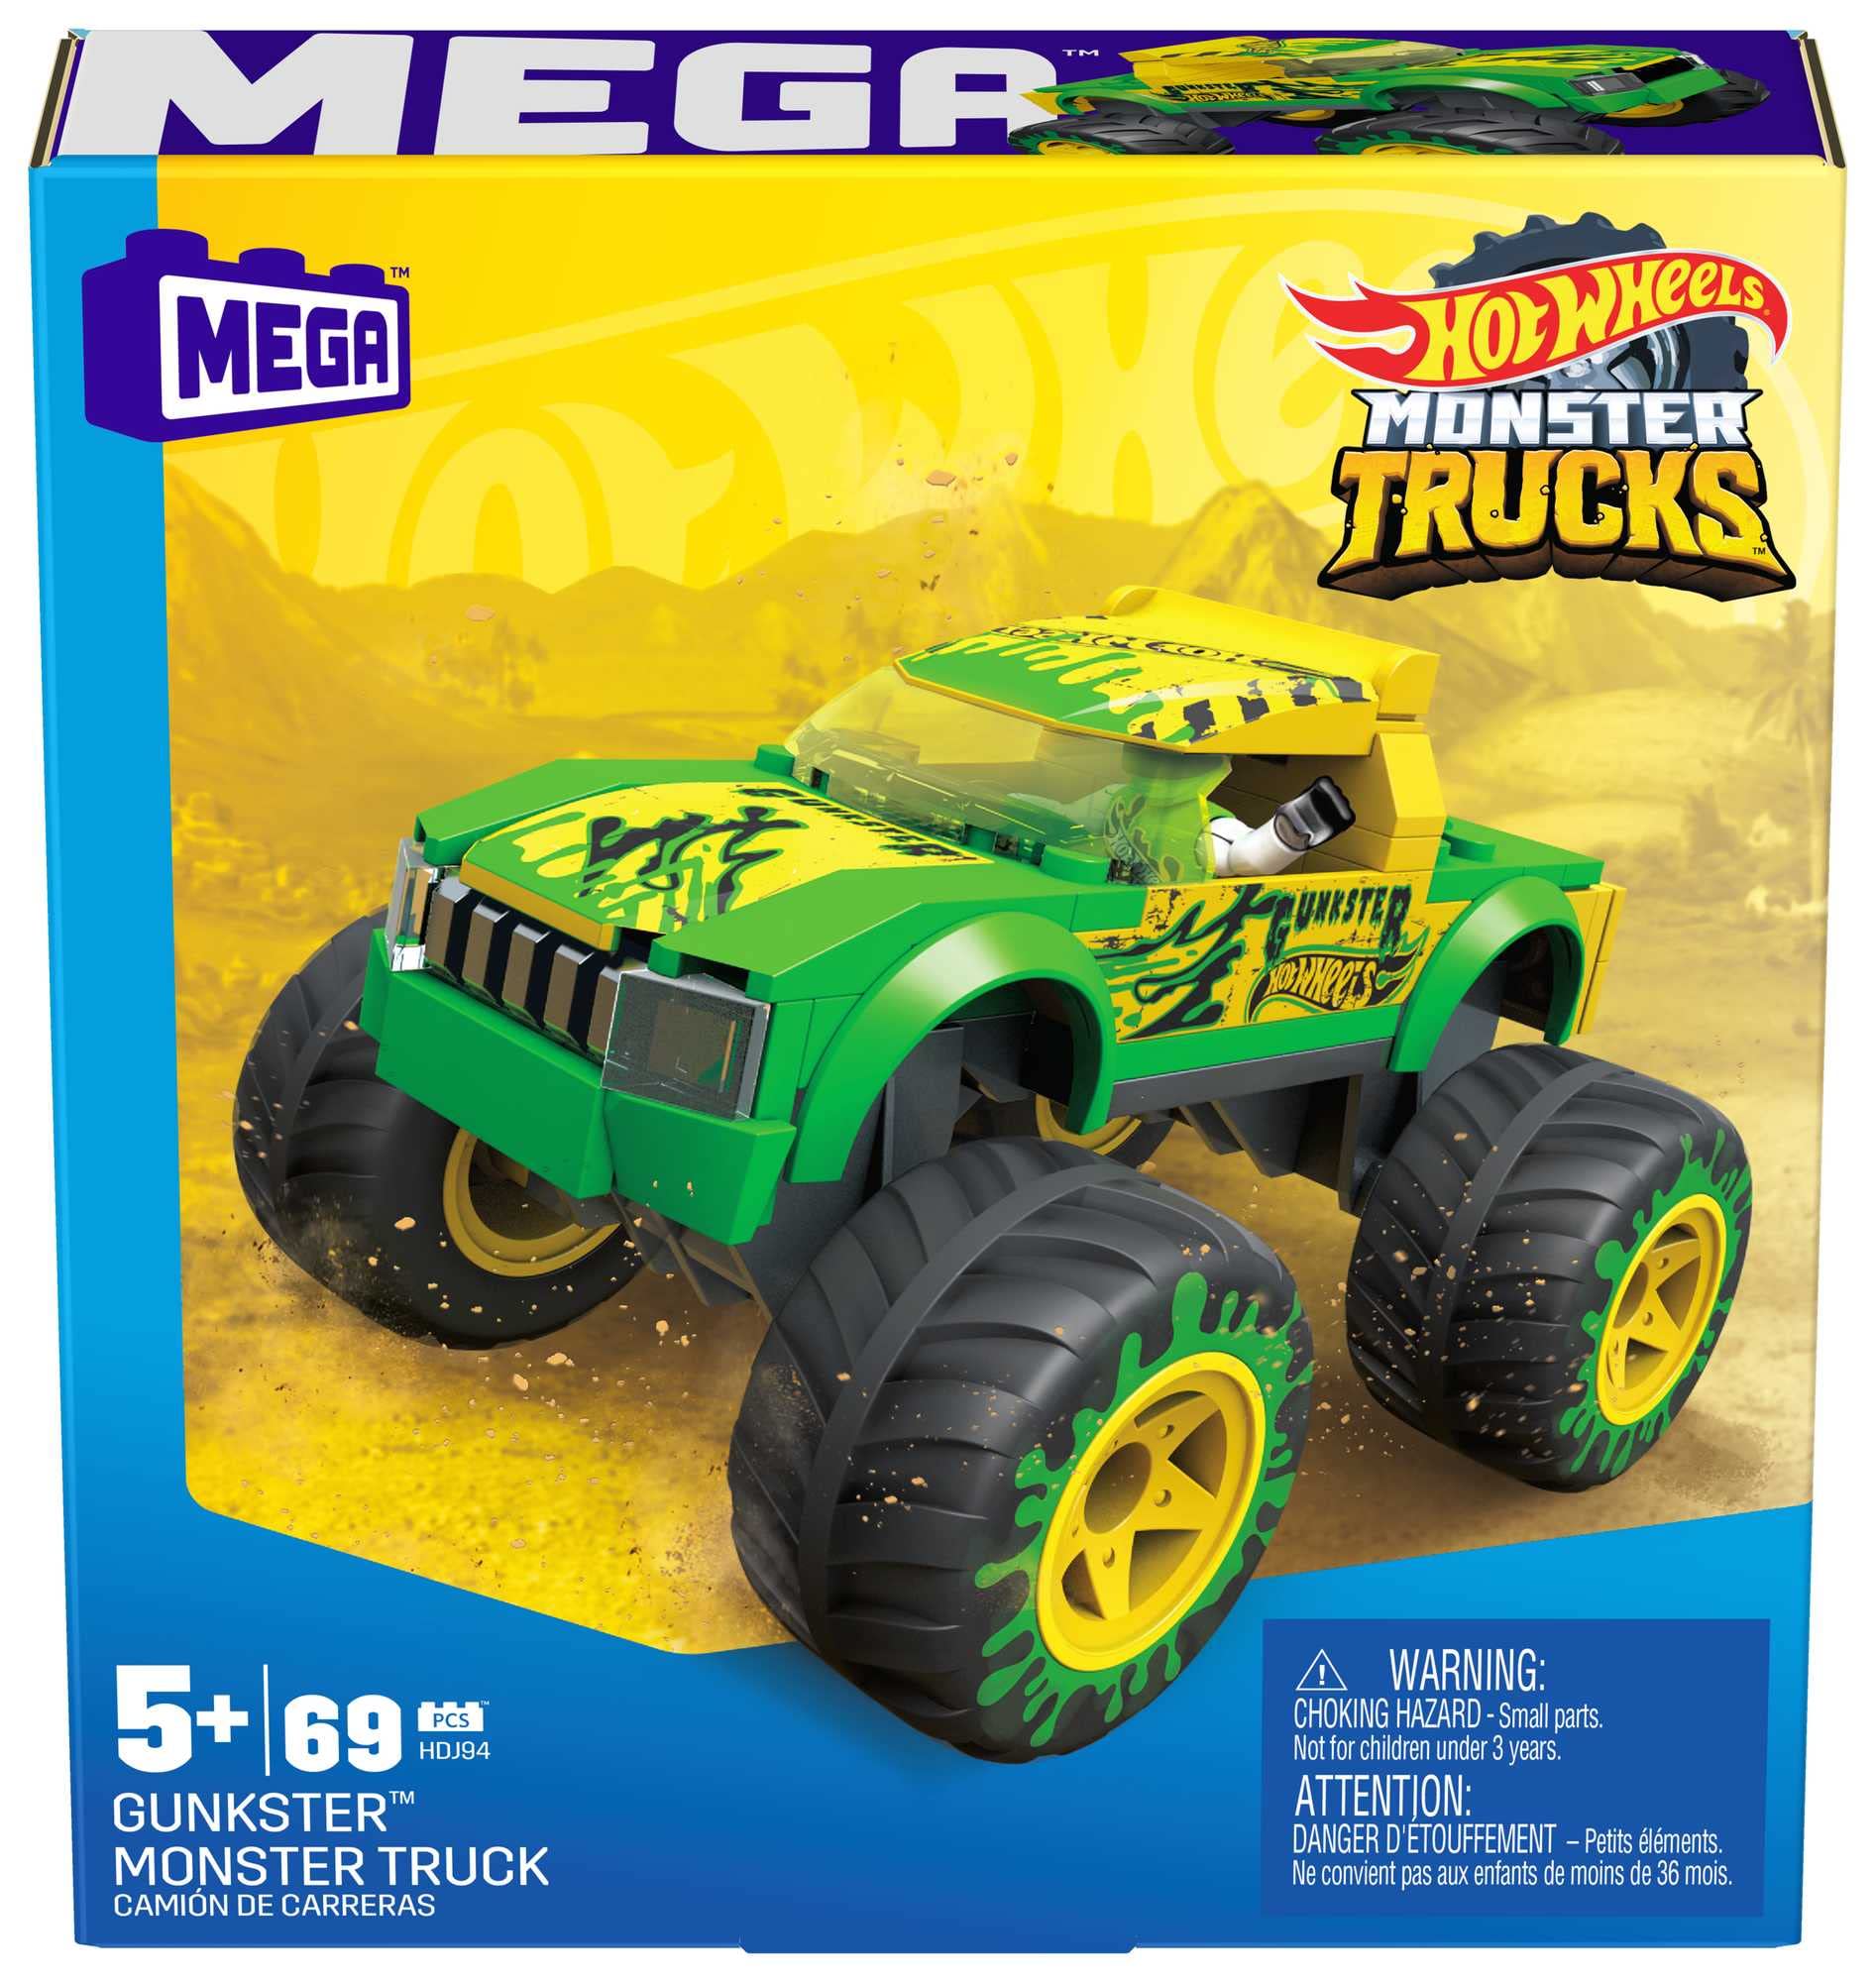 Mega Hot Wheels Gunkster Monster Truck building set toy car with micro figure driver, 69 pieces, gift set for boys and girls ages 5 and up